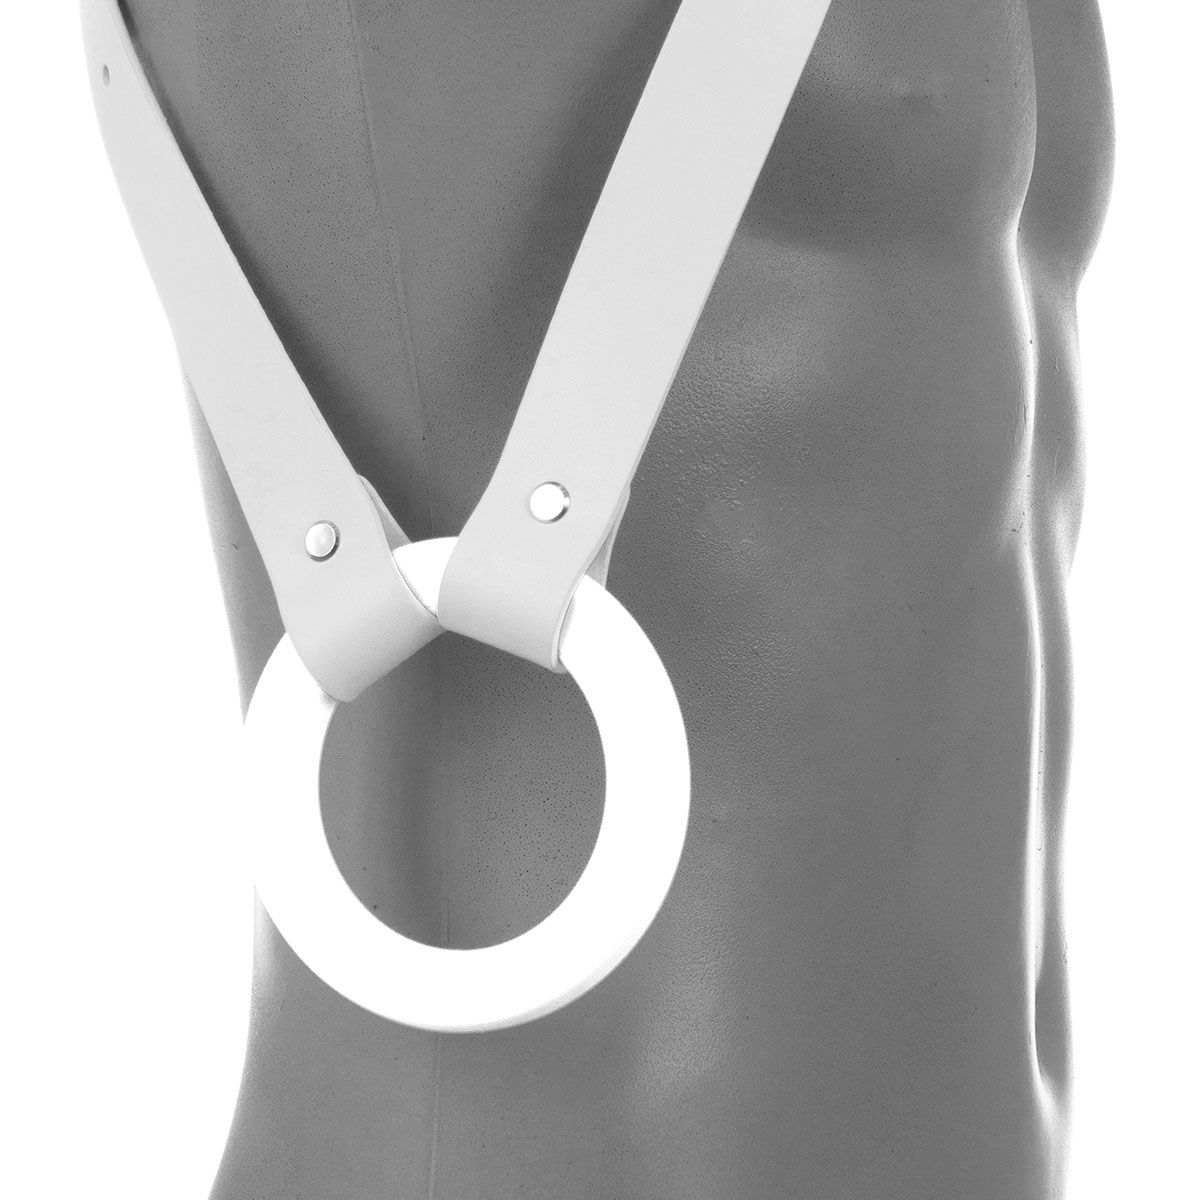 Photo of the harness from our e-shop